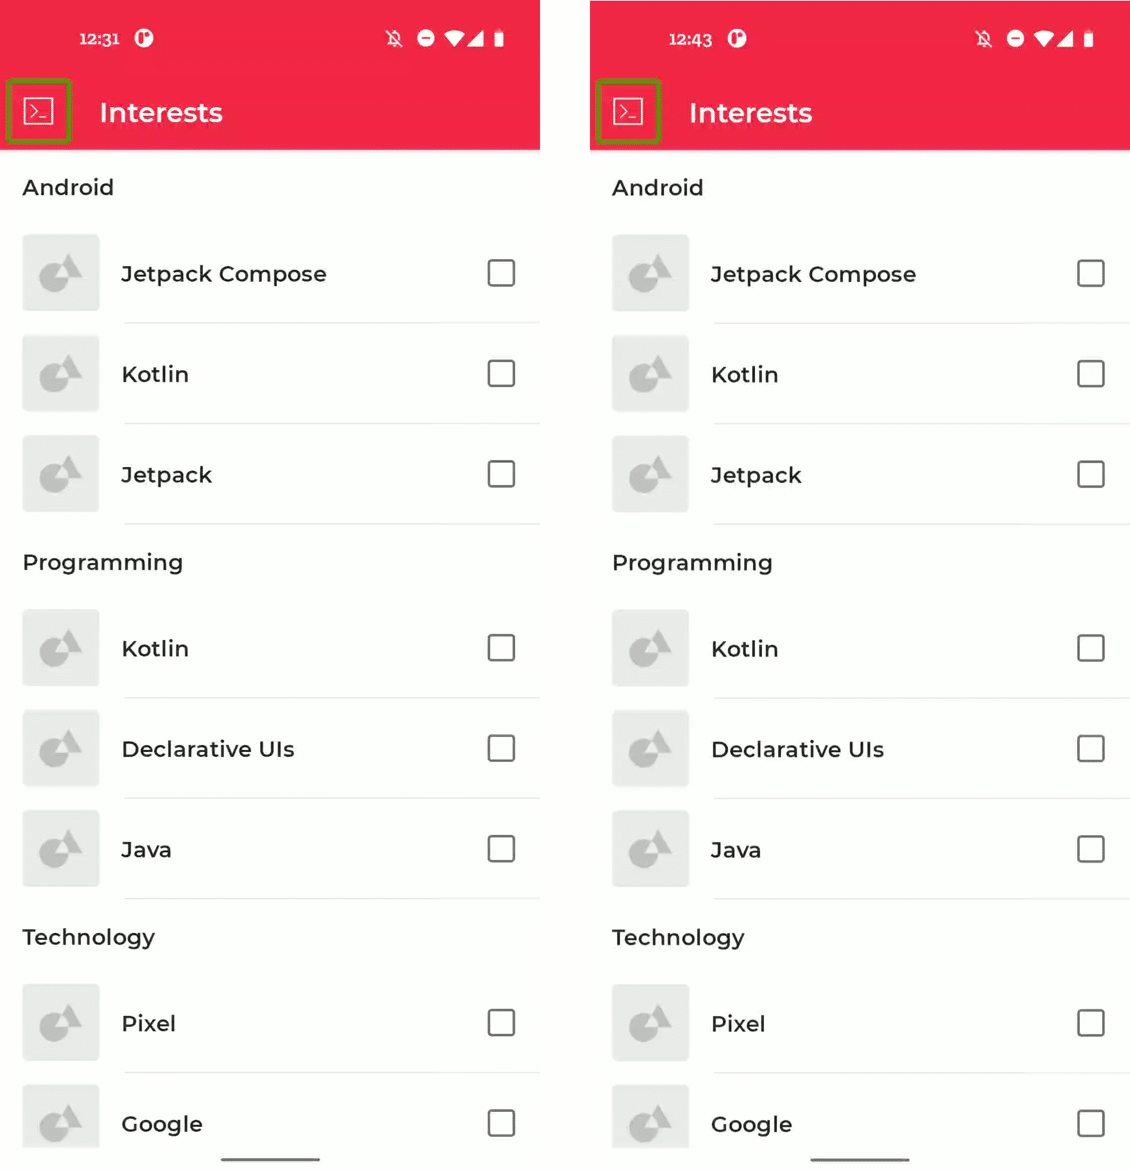 Two screen recordings with TalkBack enabled, tapping a topic in the interests screen. Left screen announces "Not ticked", while right screen announces "Not subscribed".